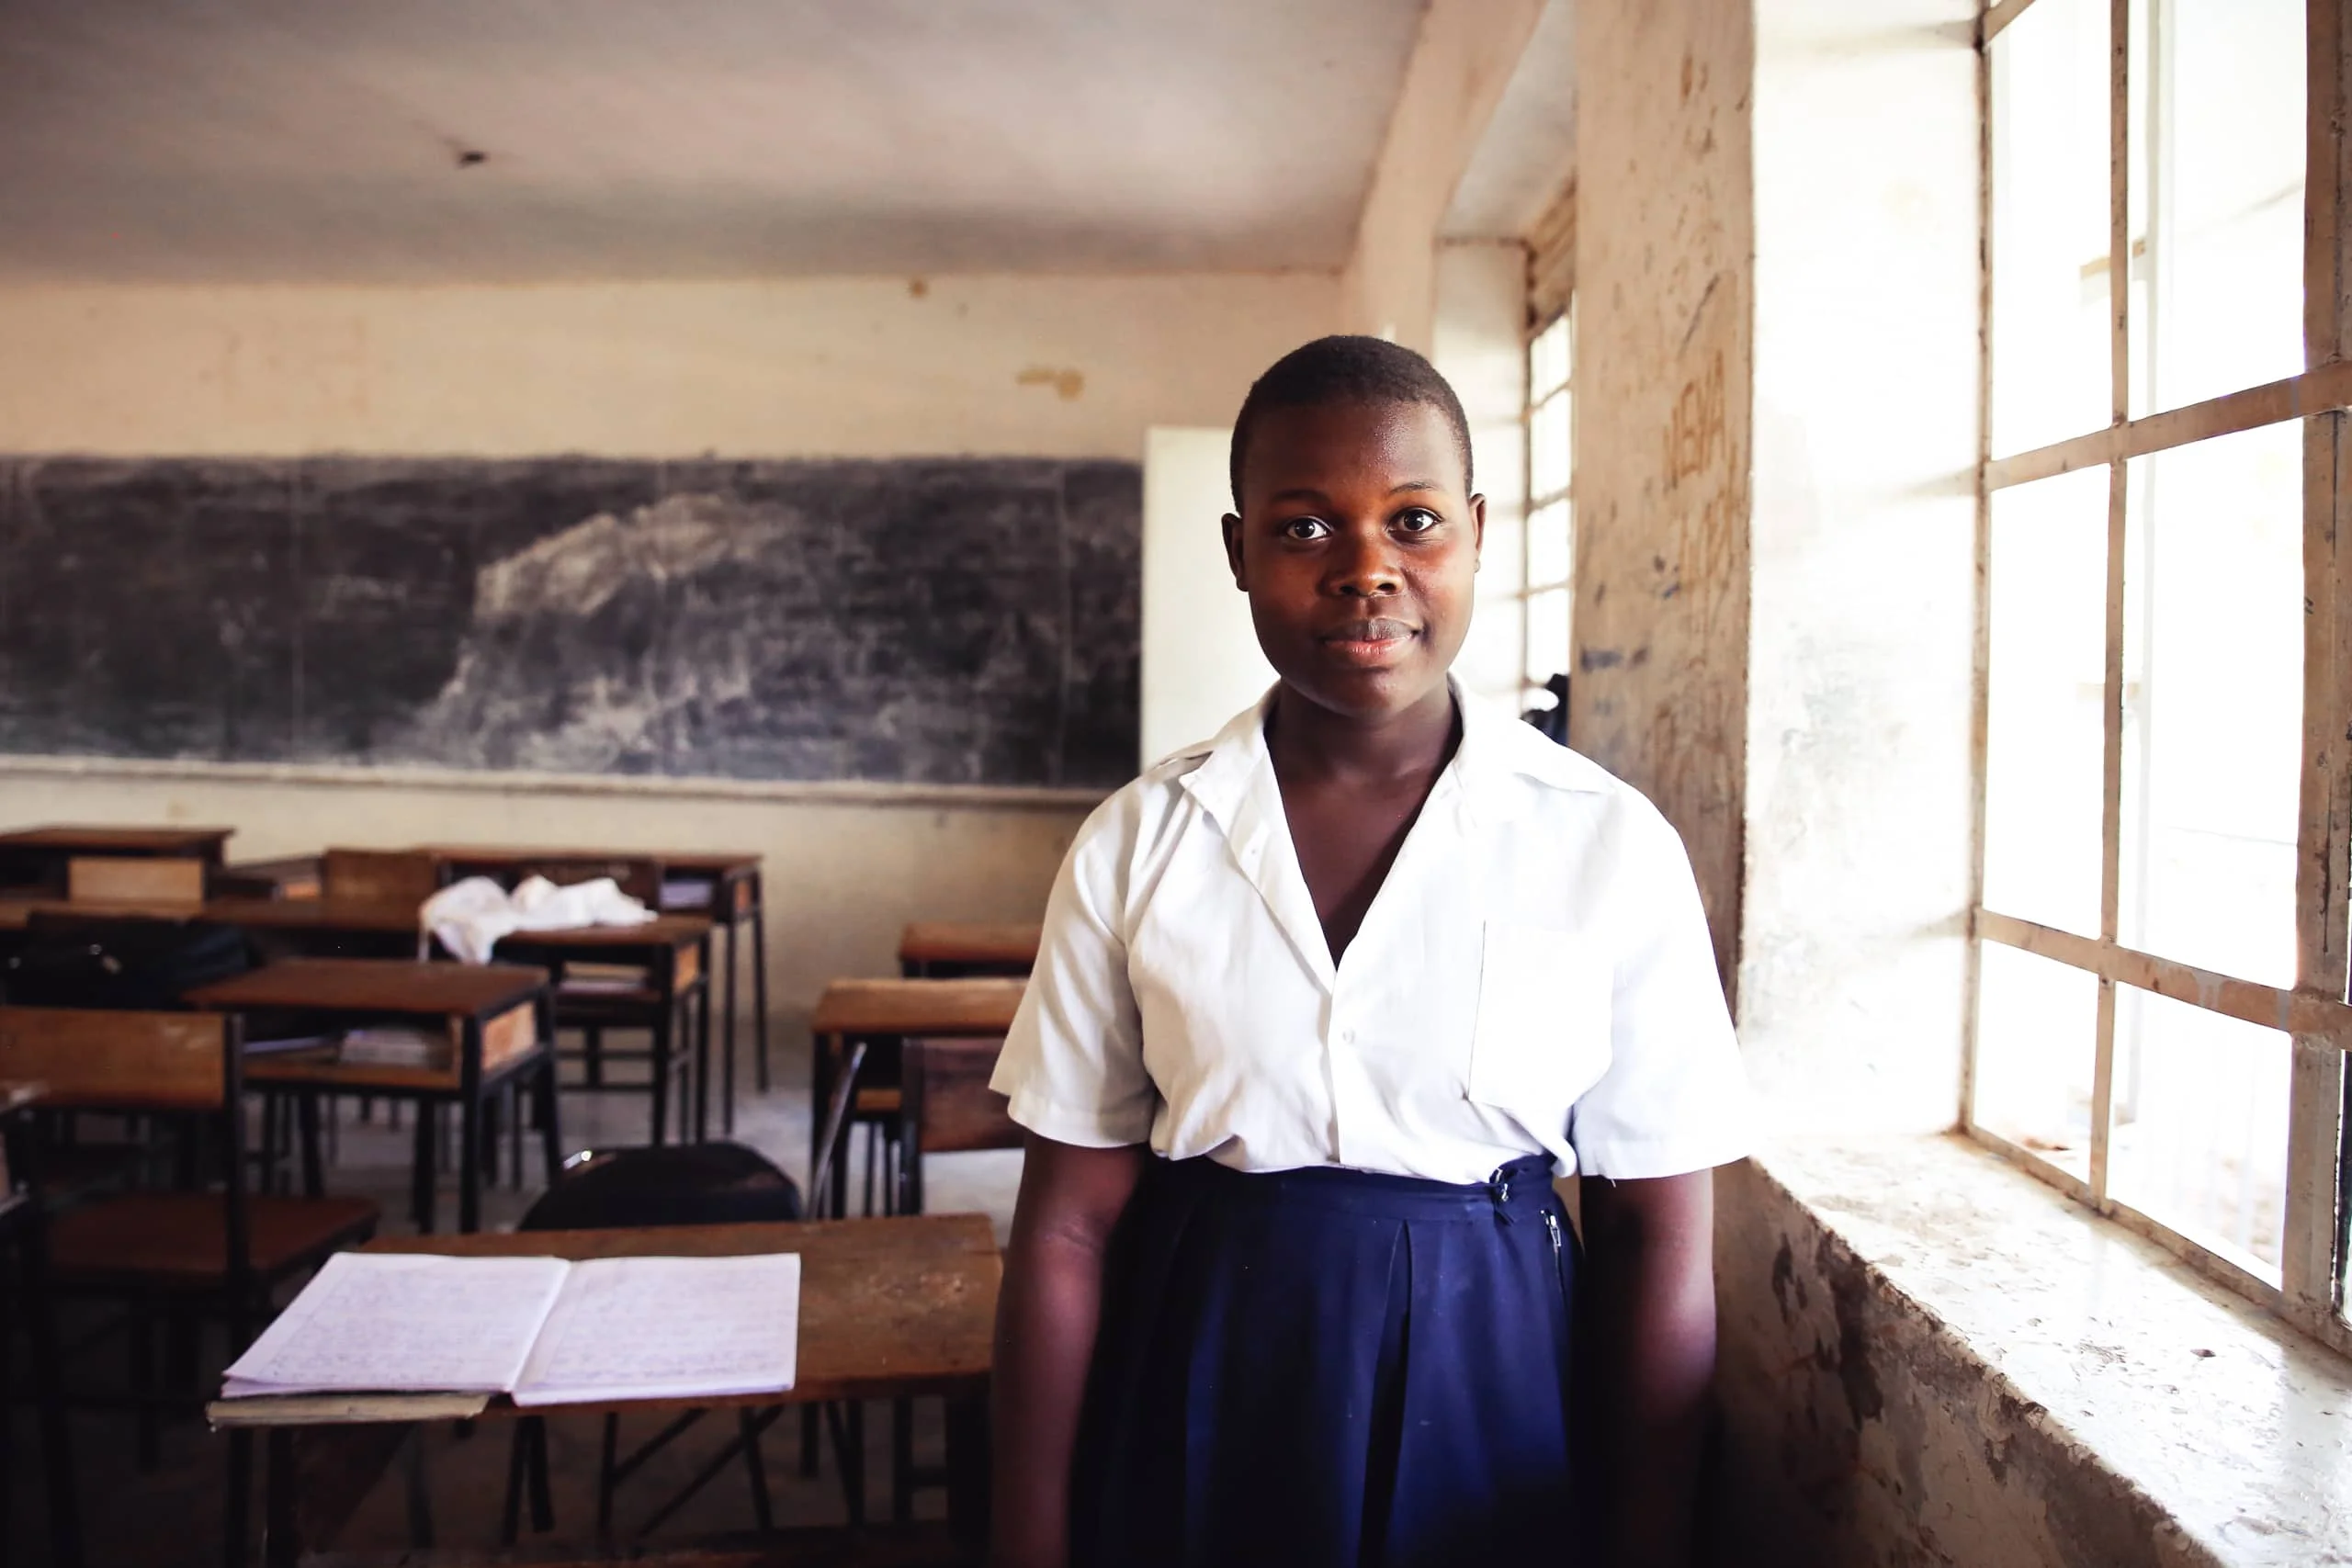 Female Ugandan secondary student in school uniform standing by a window in front of an empty classroom and blackboard